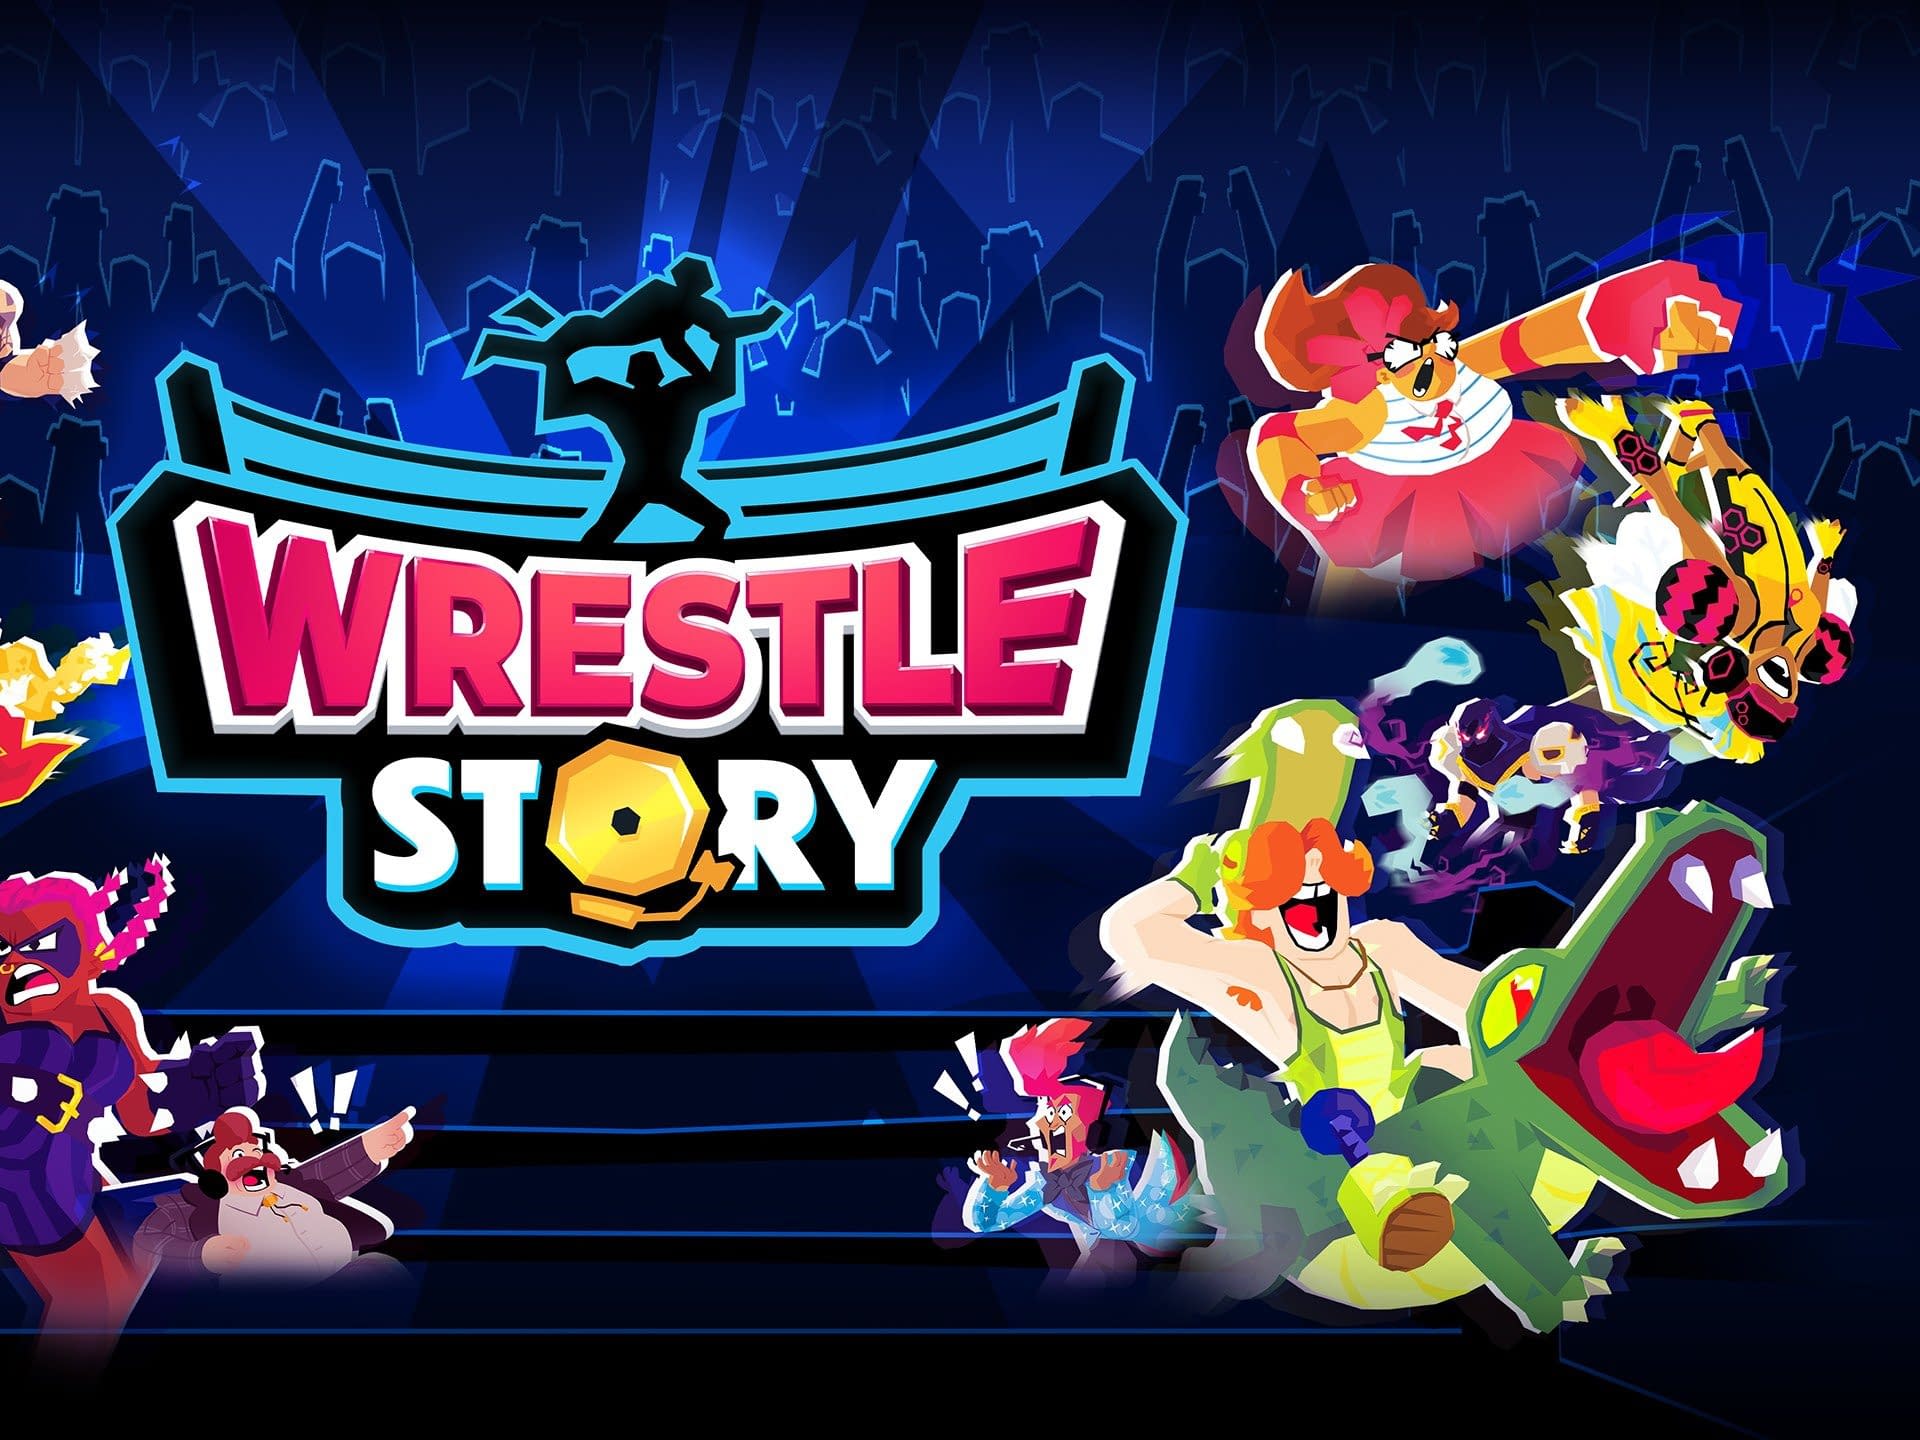 Sort-based tactical role making game Wrestle Story announced